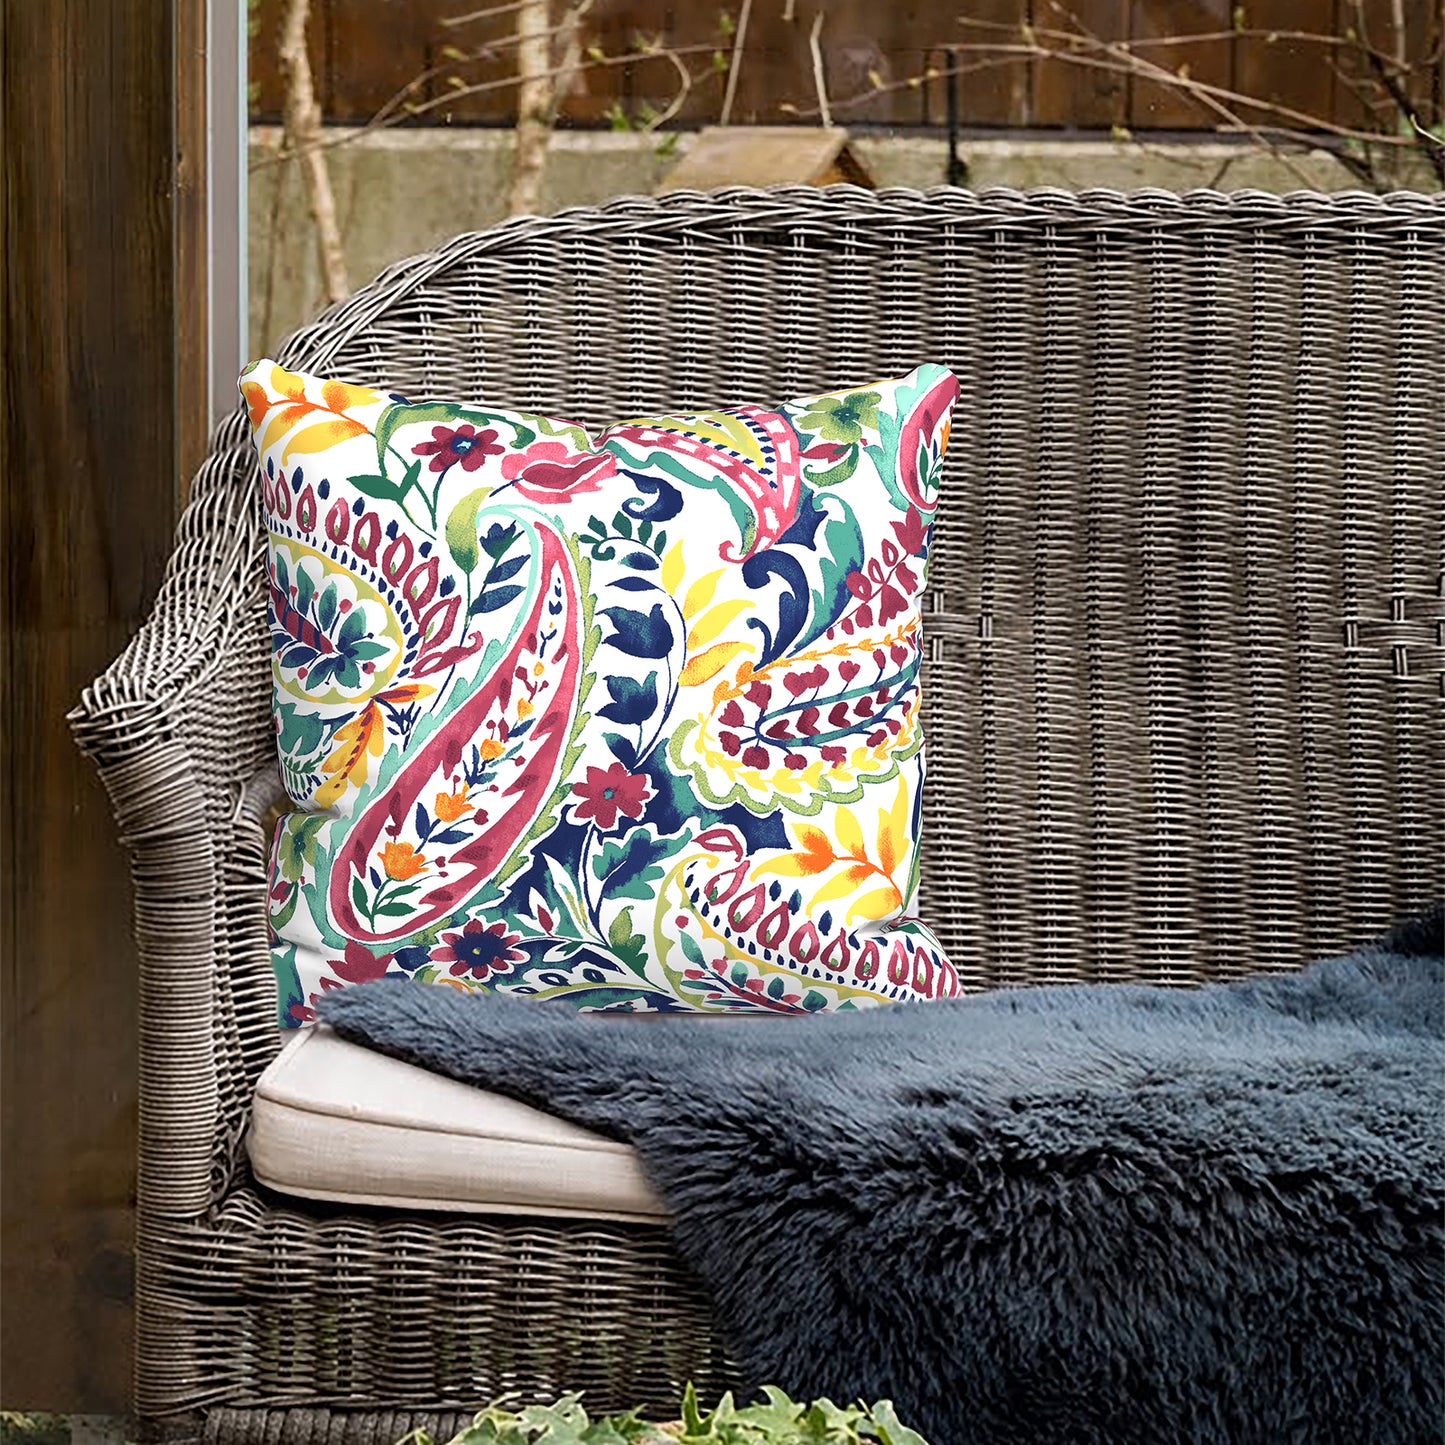 Melody Elephant Outdoor Throw Pillows 16x16 Inch, water Repellent patio pillows with Inners set of 2, outdoor pillows for patio furniture home garden, Vigour Paisley